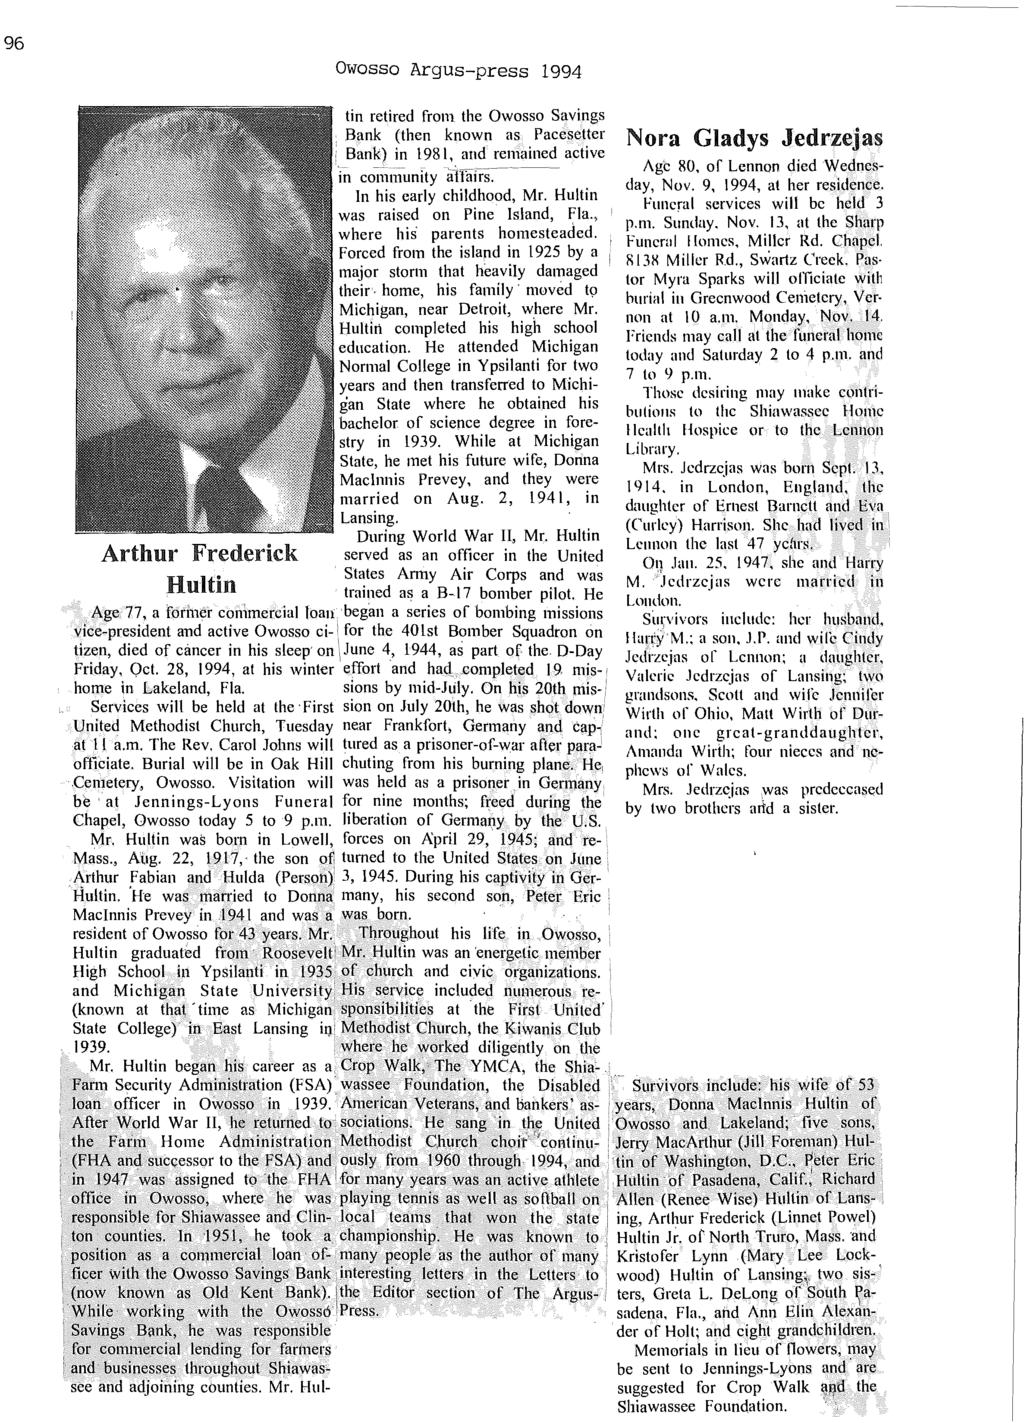 96 Owosso Argus-press 1994 Arthur Frederick Hultin tin retired frol11 the Owosso Savings,'Bank (then known as Pacesetter i Bank) in 1981, and remained active in coll1nlunity "atlalrs~----- In his